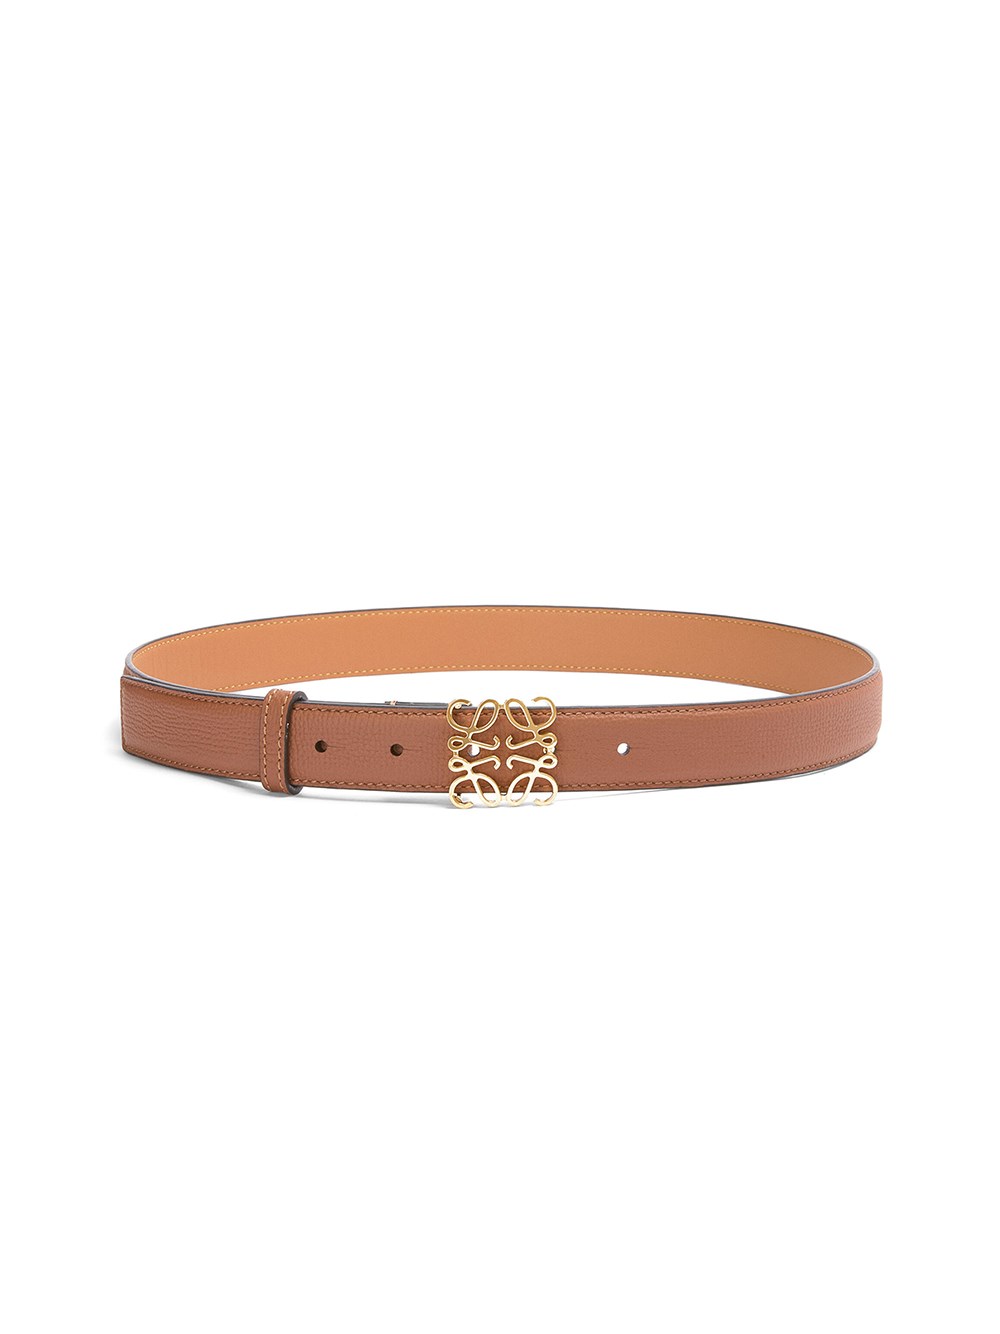 loewe ANAGRAM BELT available on montiboutique.com - 44139